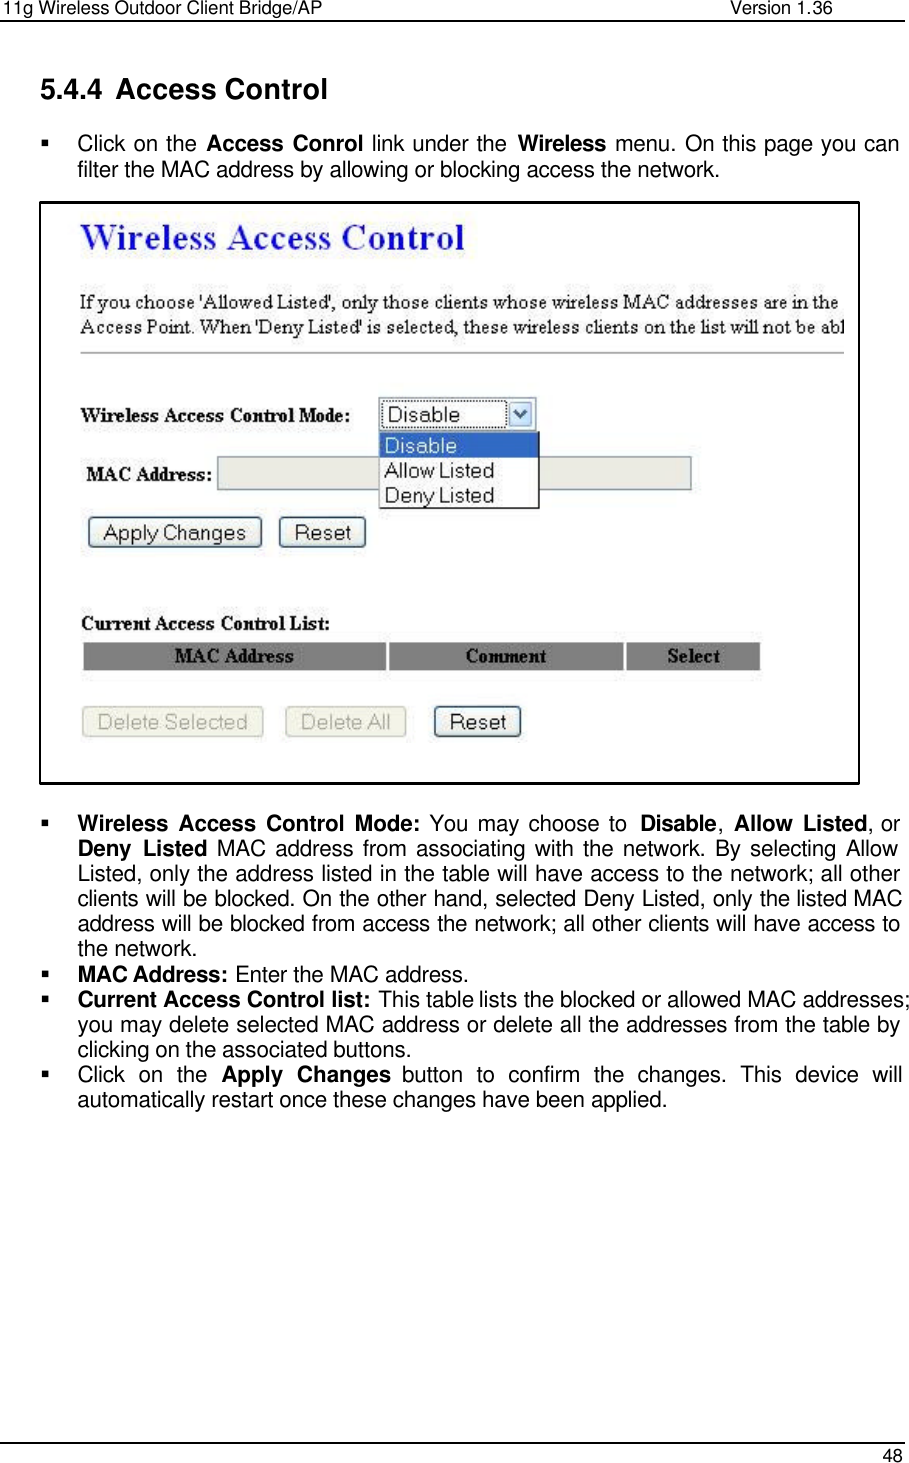 11g Wireless Outdoor Client Bridge/AP                Version 1.36    48  5.4.4 Access Control  § Click on the Access Conrol link under the Wireless menu. On this page you can filter the MAC address by allowing or blocking access the network.                           § Wireless Access Control Mode: You may choose to  Disable,  Allow Listed, or Deny Listed MAC address from associating with the network. By selecting Allow Listed, only the address listed in the table will have access to the network; all other clients will be blocked. On the other hand, selected Deny Listed, only the listed MAC address will be blocked from access the network; all other clients will have access to the network.  § MAC Address: Enter the MAC address.  § Current Access Control list: This table lists the blocked or allowed MAC addresses; you may delete selected MAC address or delete all the addresses from the table by clicking on the associated buttons.  § Click on the Apply Changes button to confirm the changes. This device will automatically restart once these changes have been applied.               